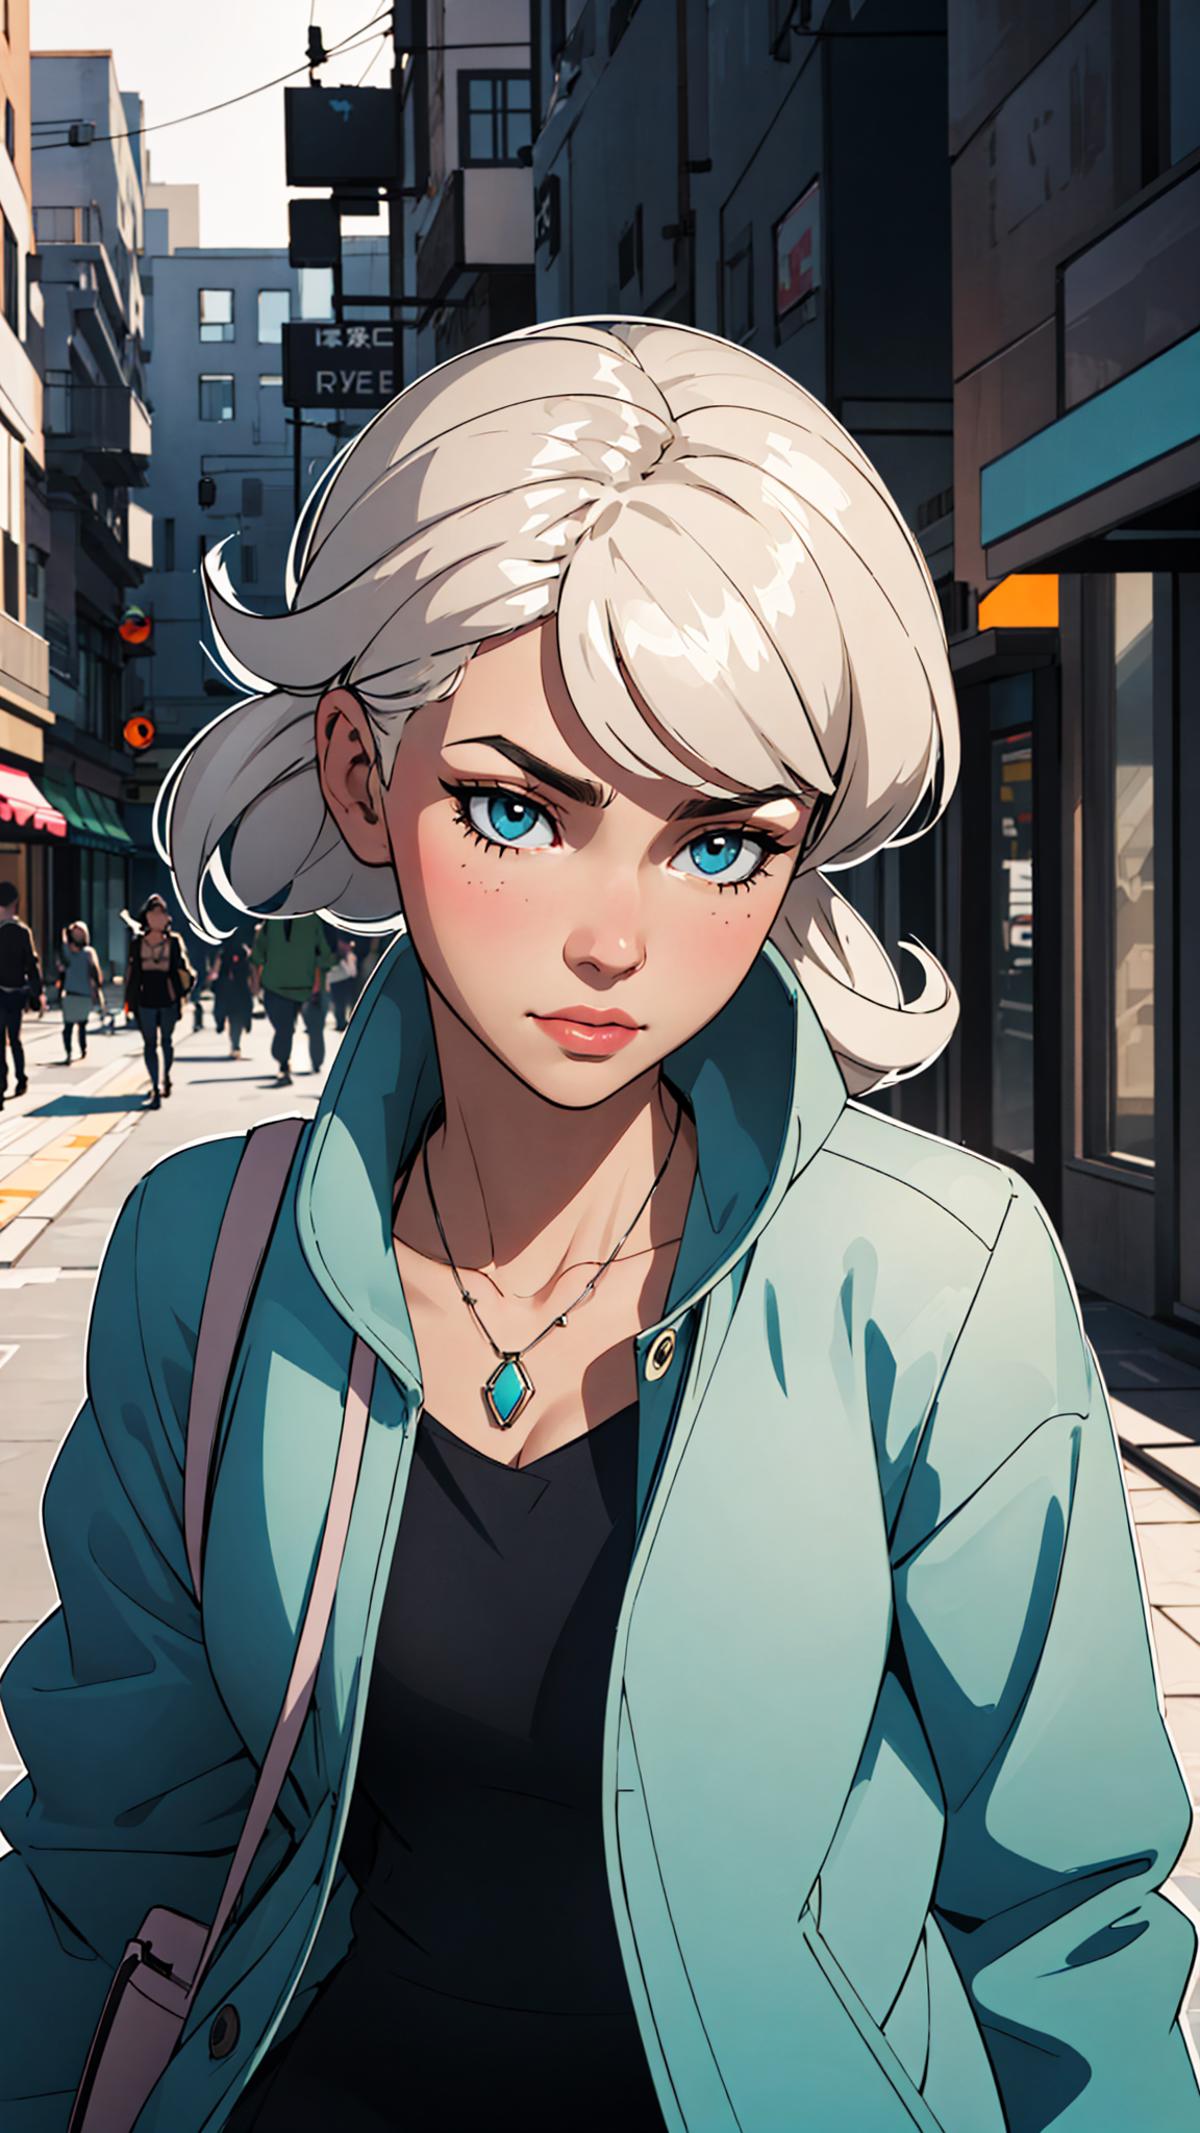 Drawing of a woman with blue eyes, blonde hair, and a blue jacket on a city street.